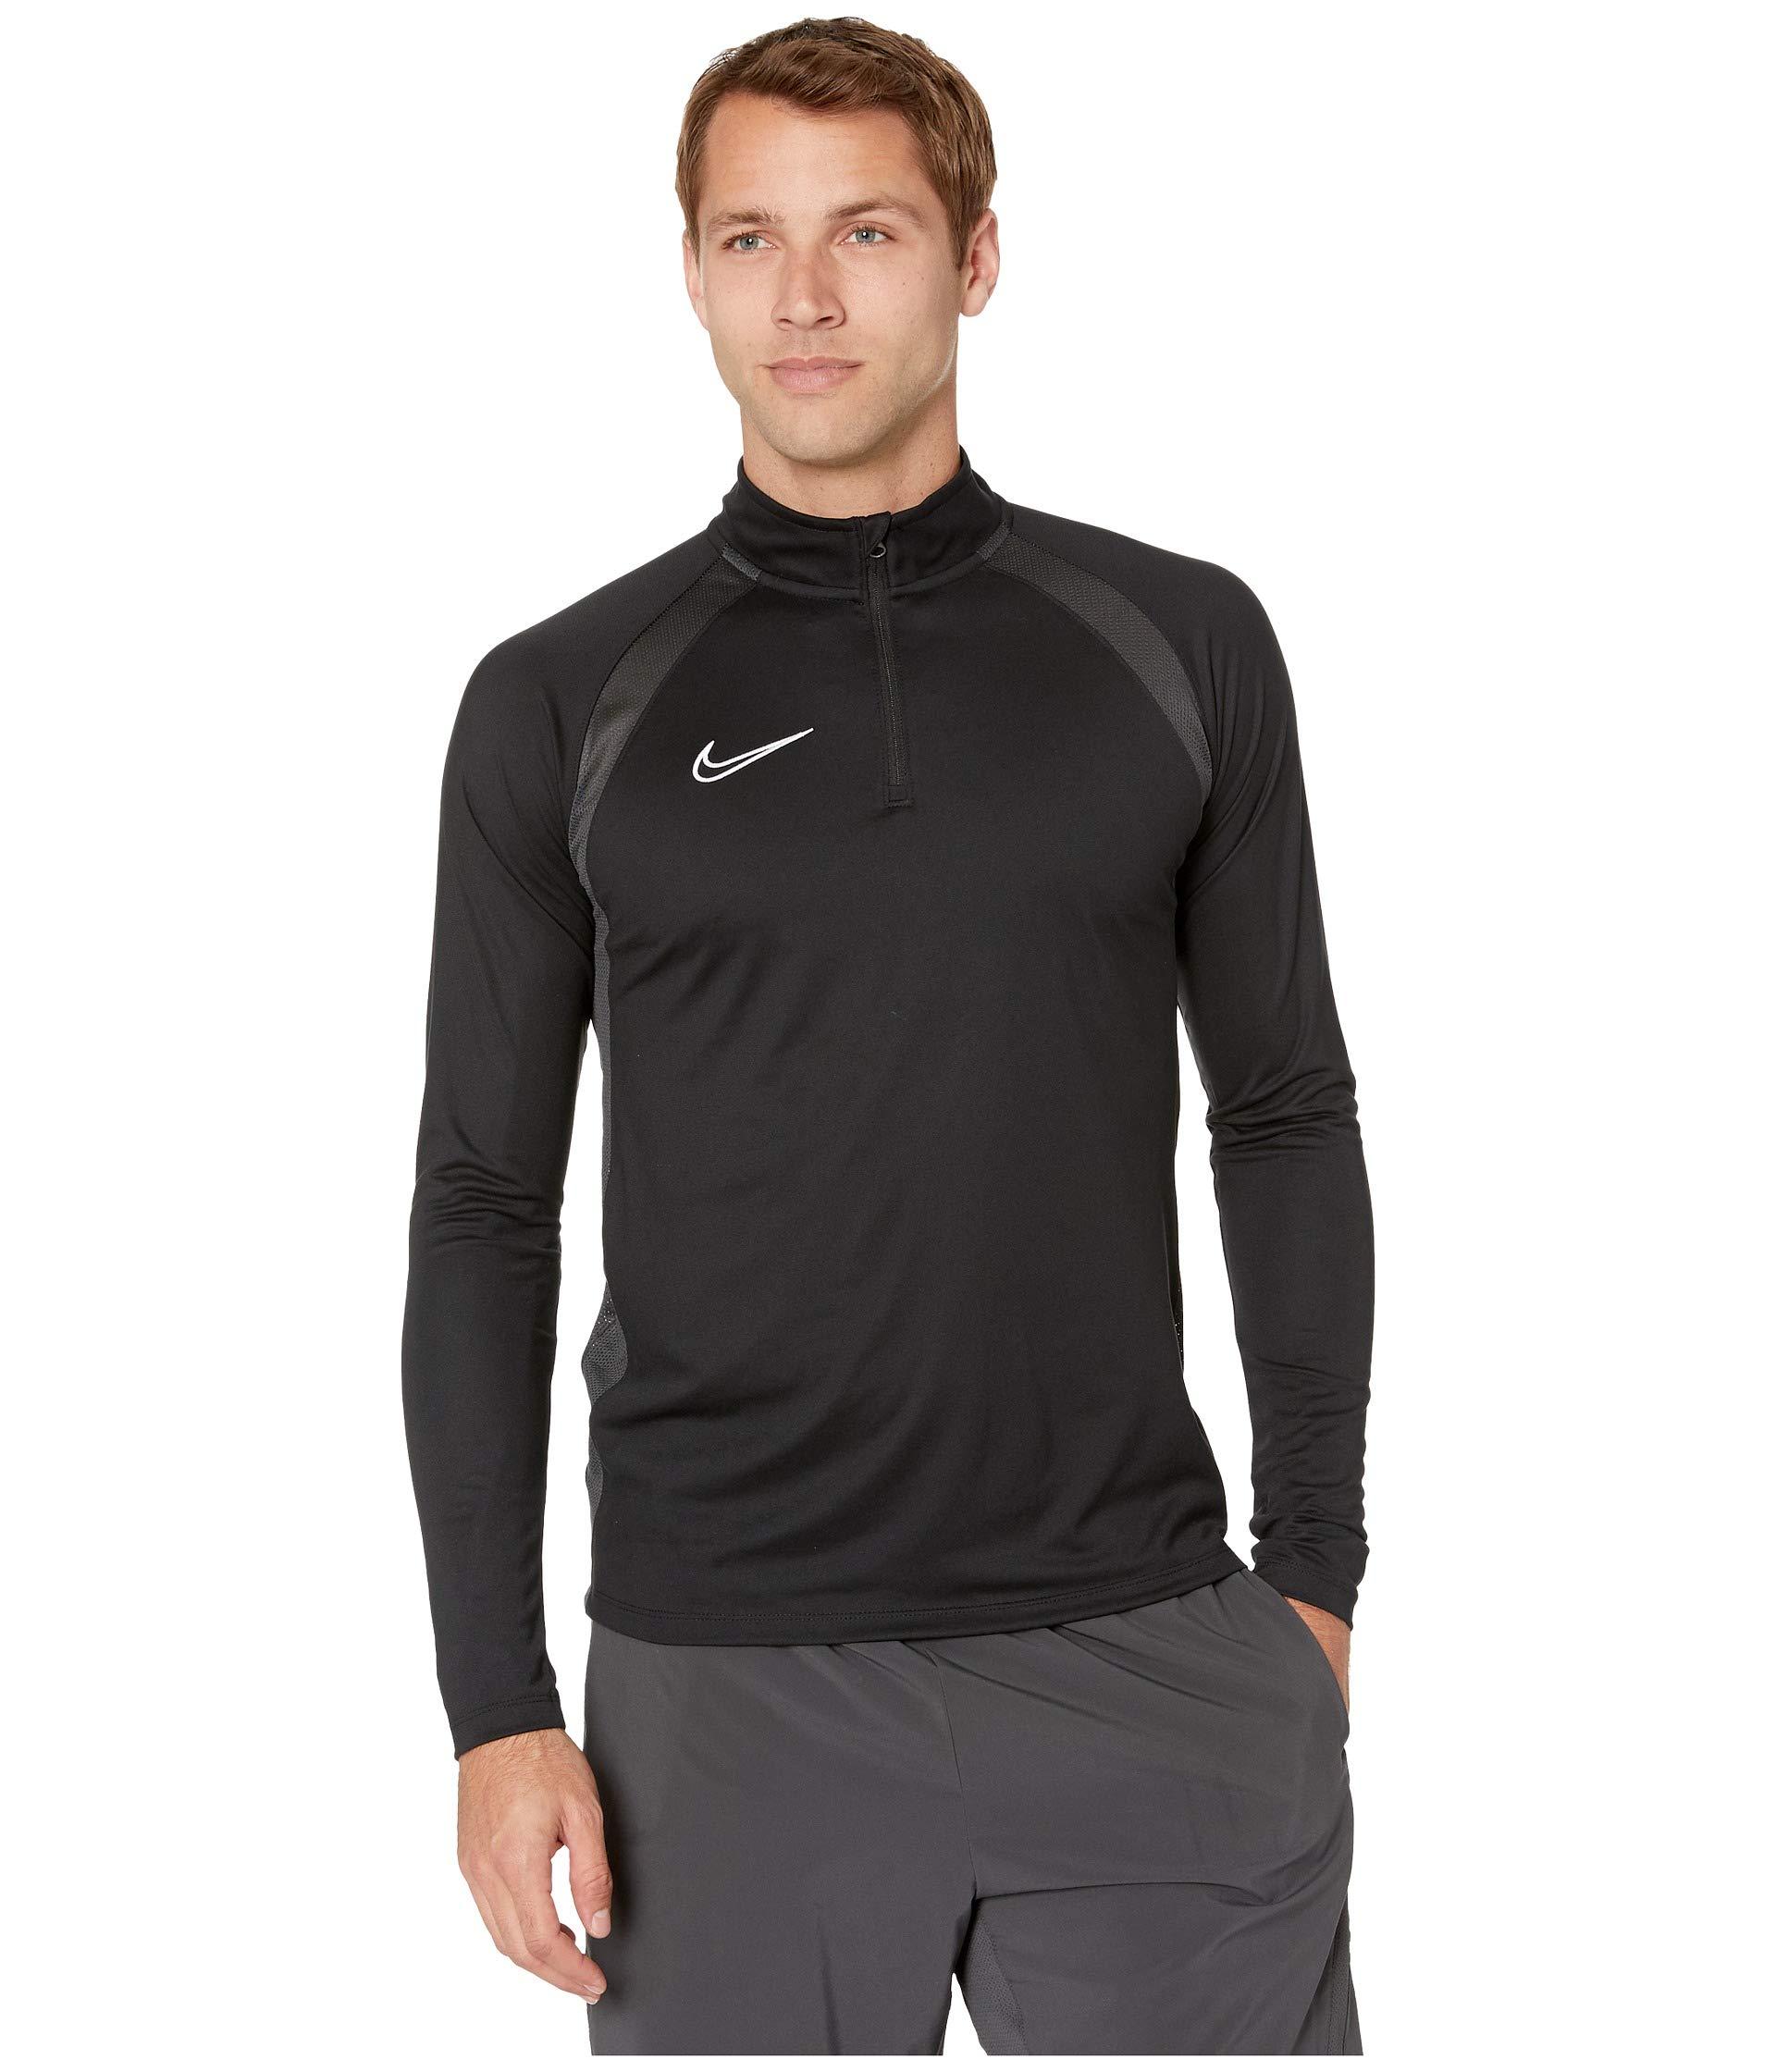 Nike Dry Academy Smr Drill Top (black/anthracite/white) Men's Workout ...